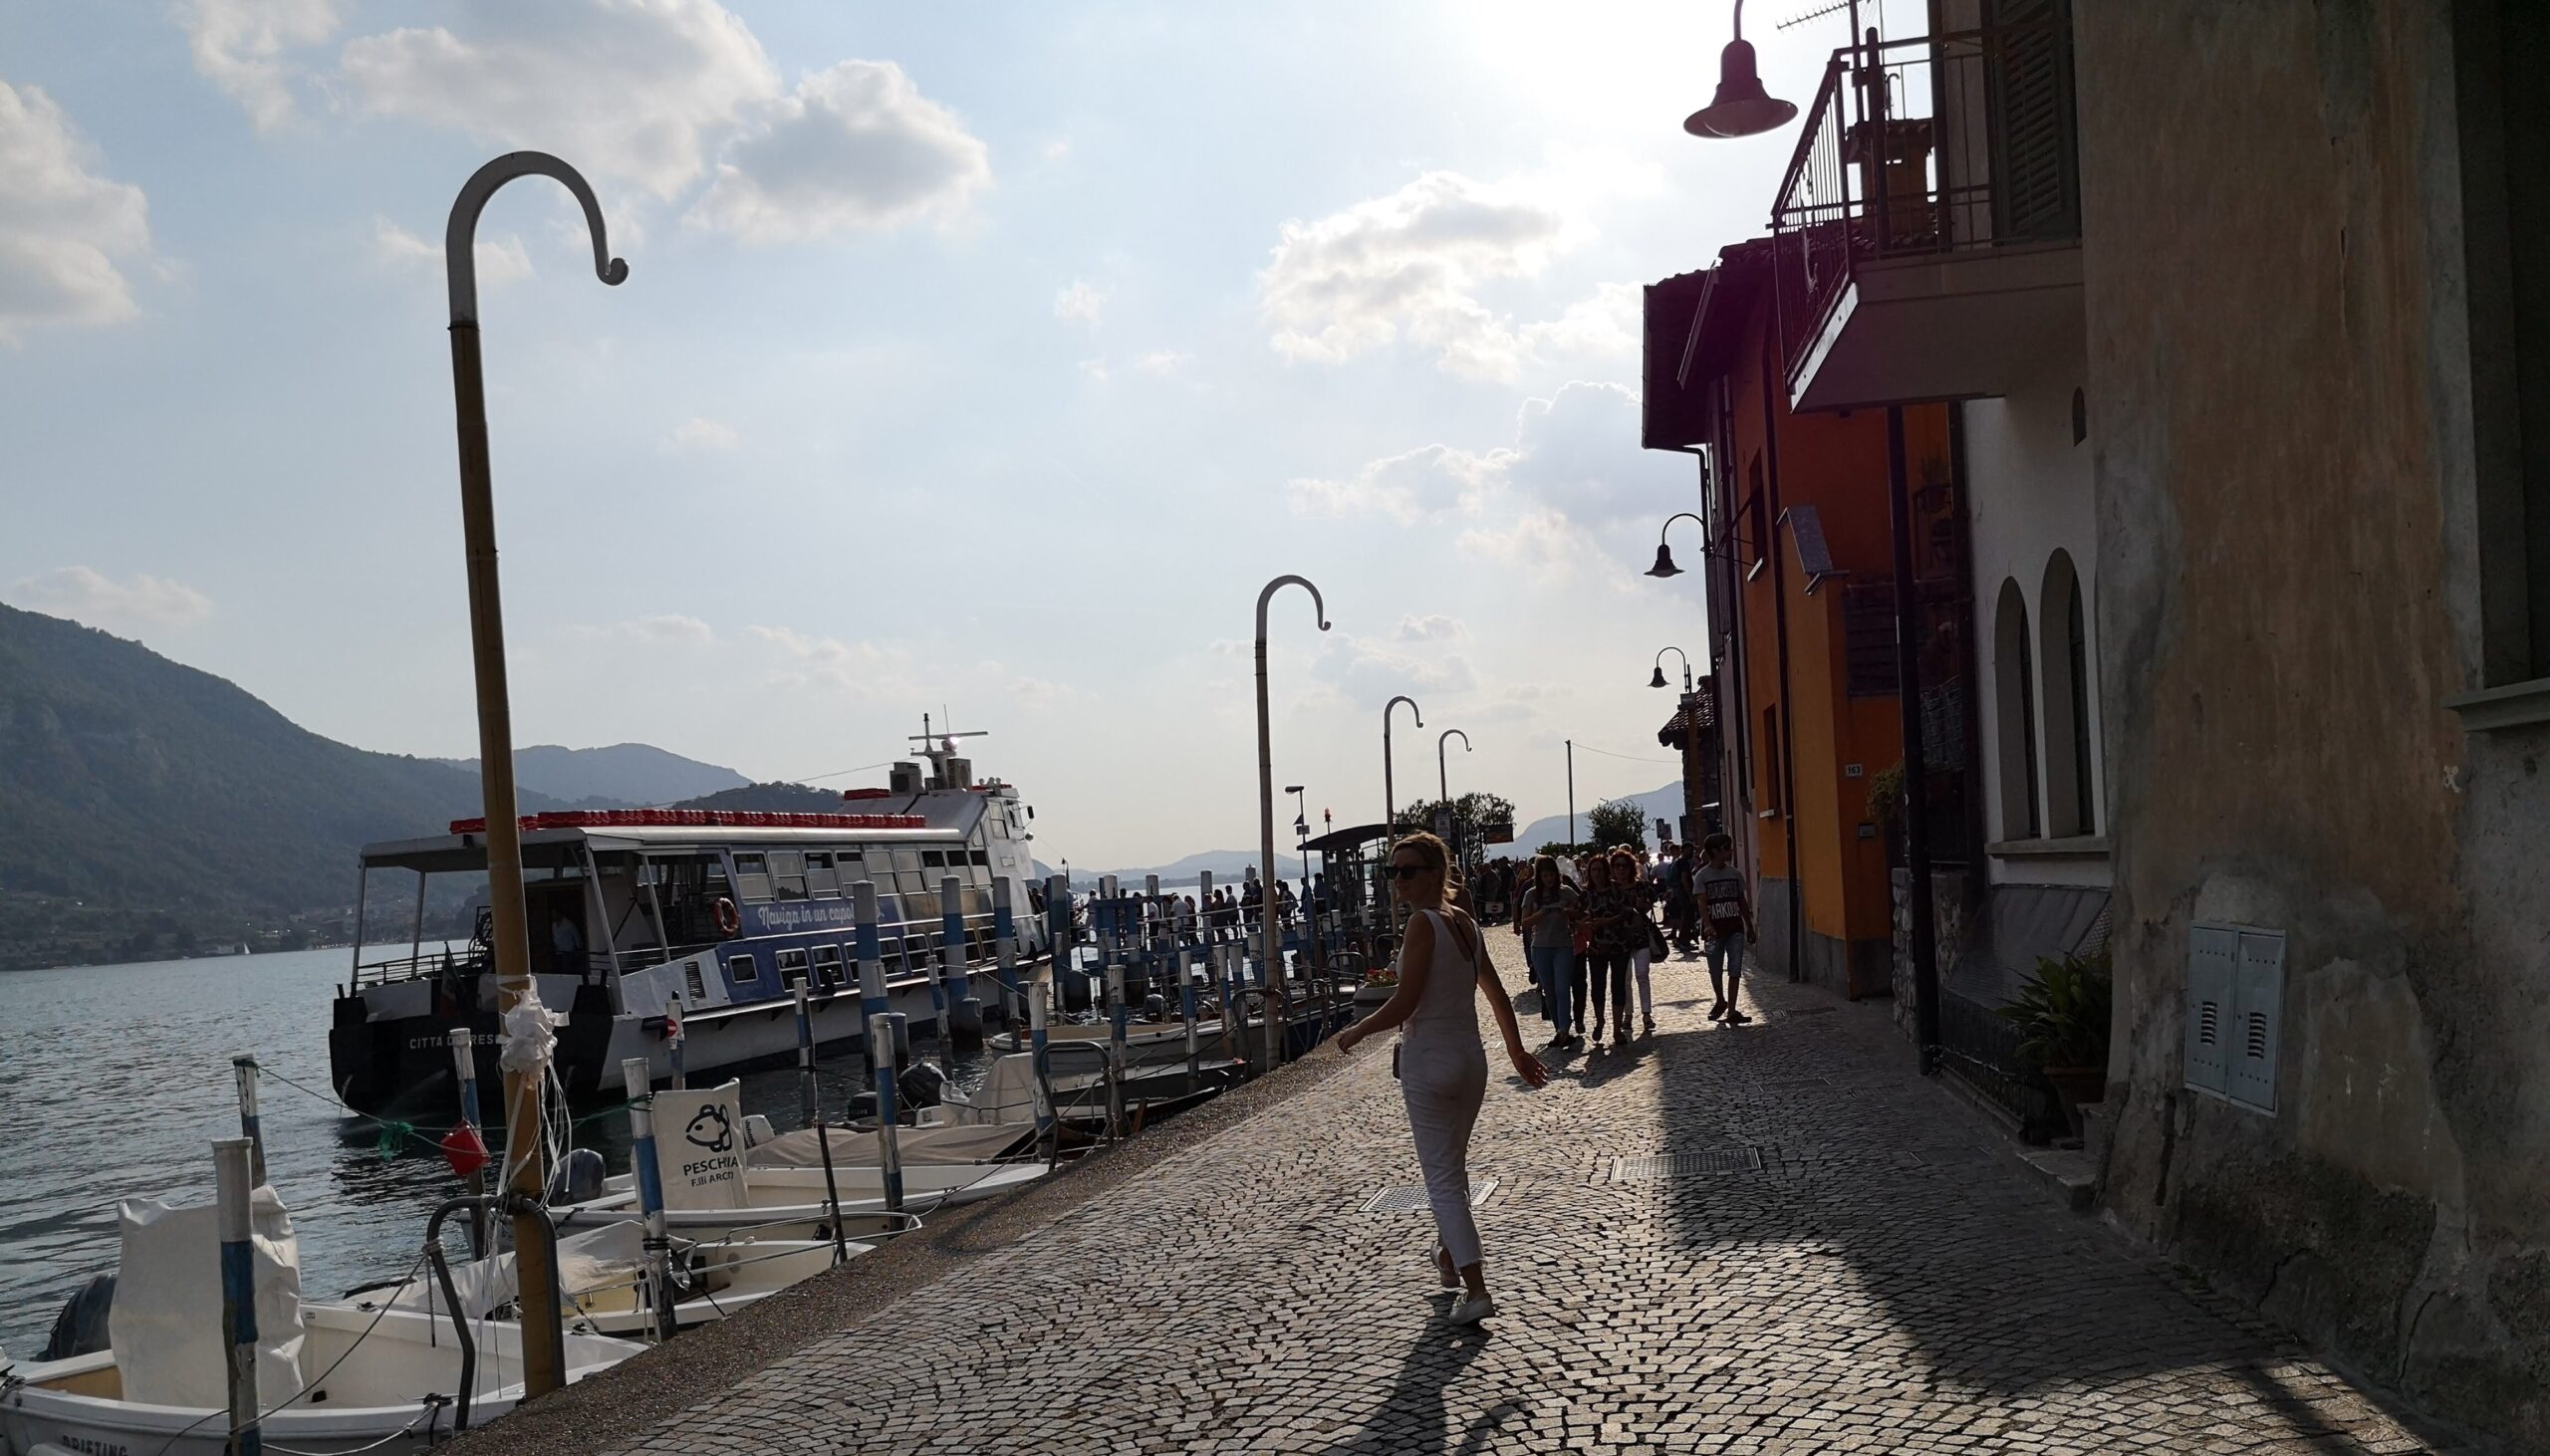 Lake Iseo: The Lesser Known Gem of the Northern Italian Lakes